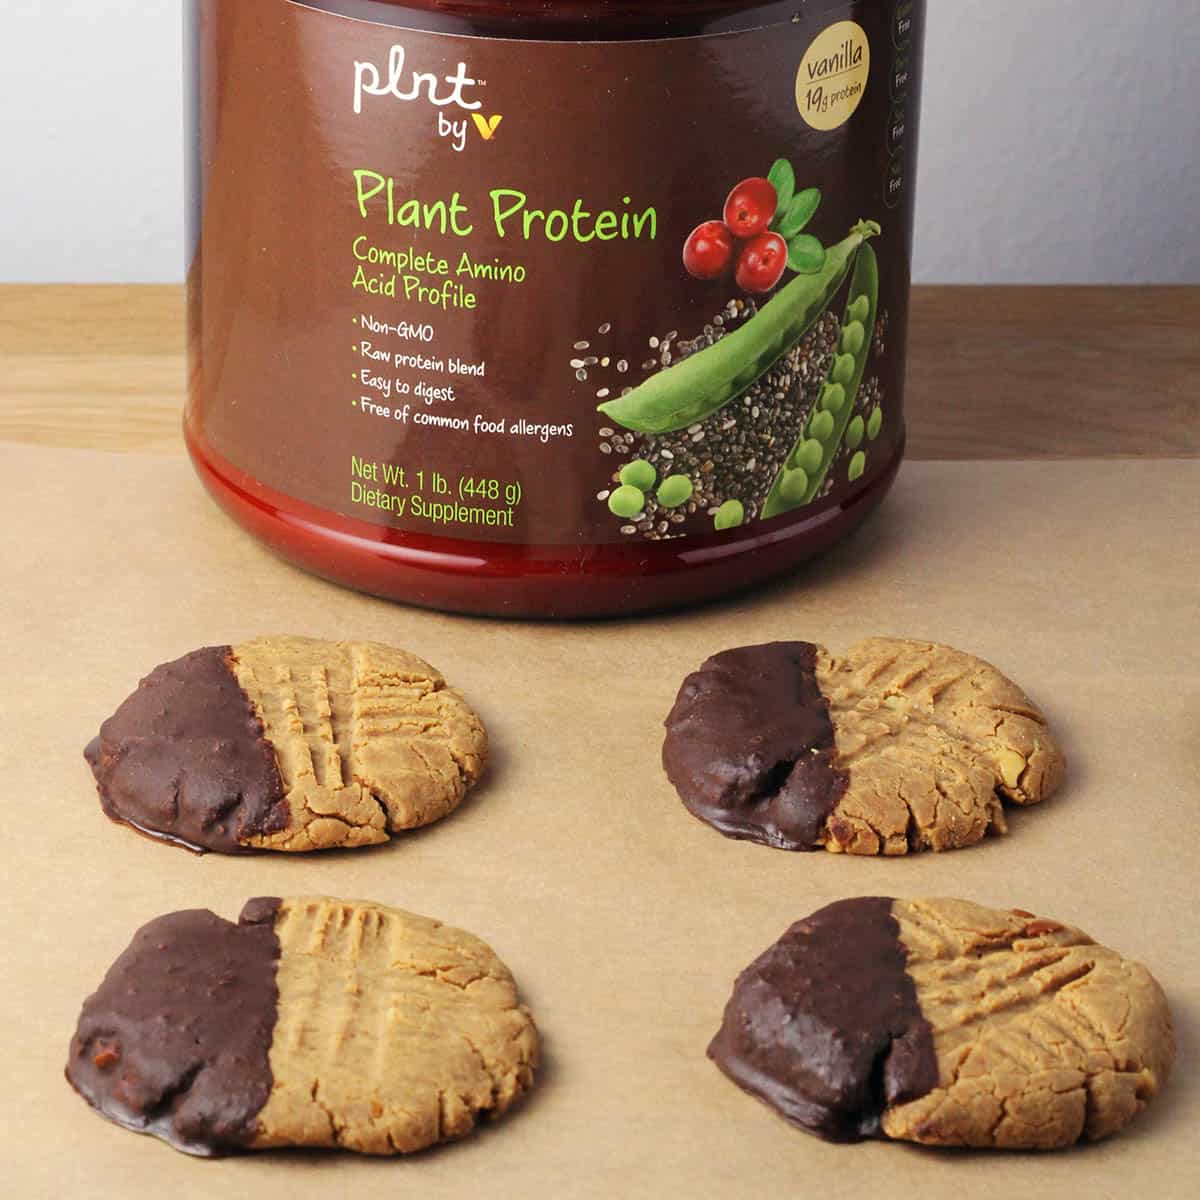 four peanut butter protein cookies half dipped in chocolate in front of a canister of plnt brand protein powder